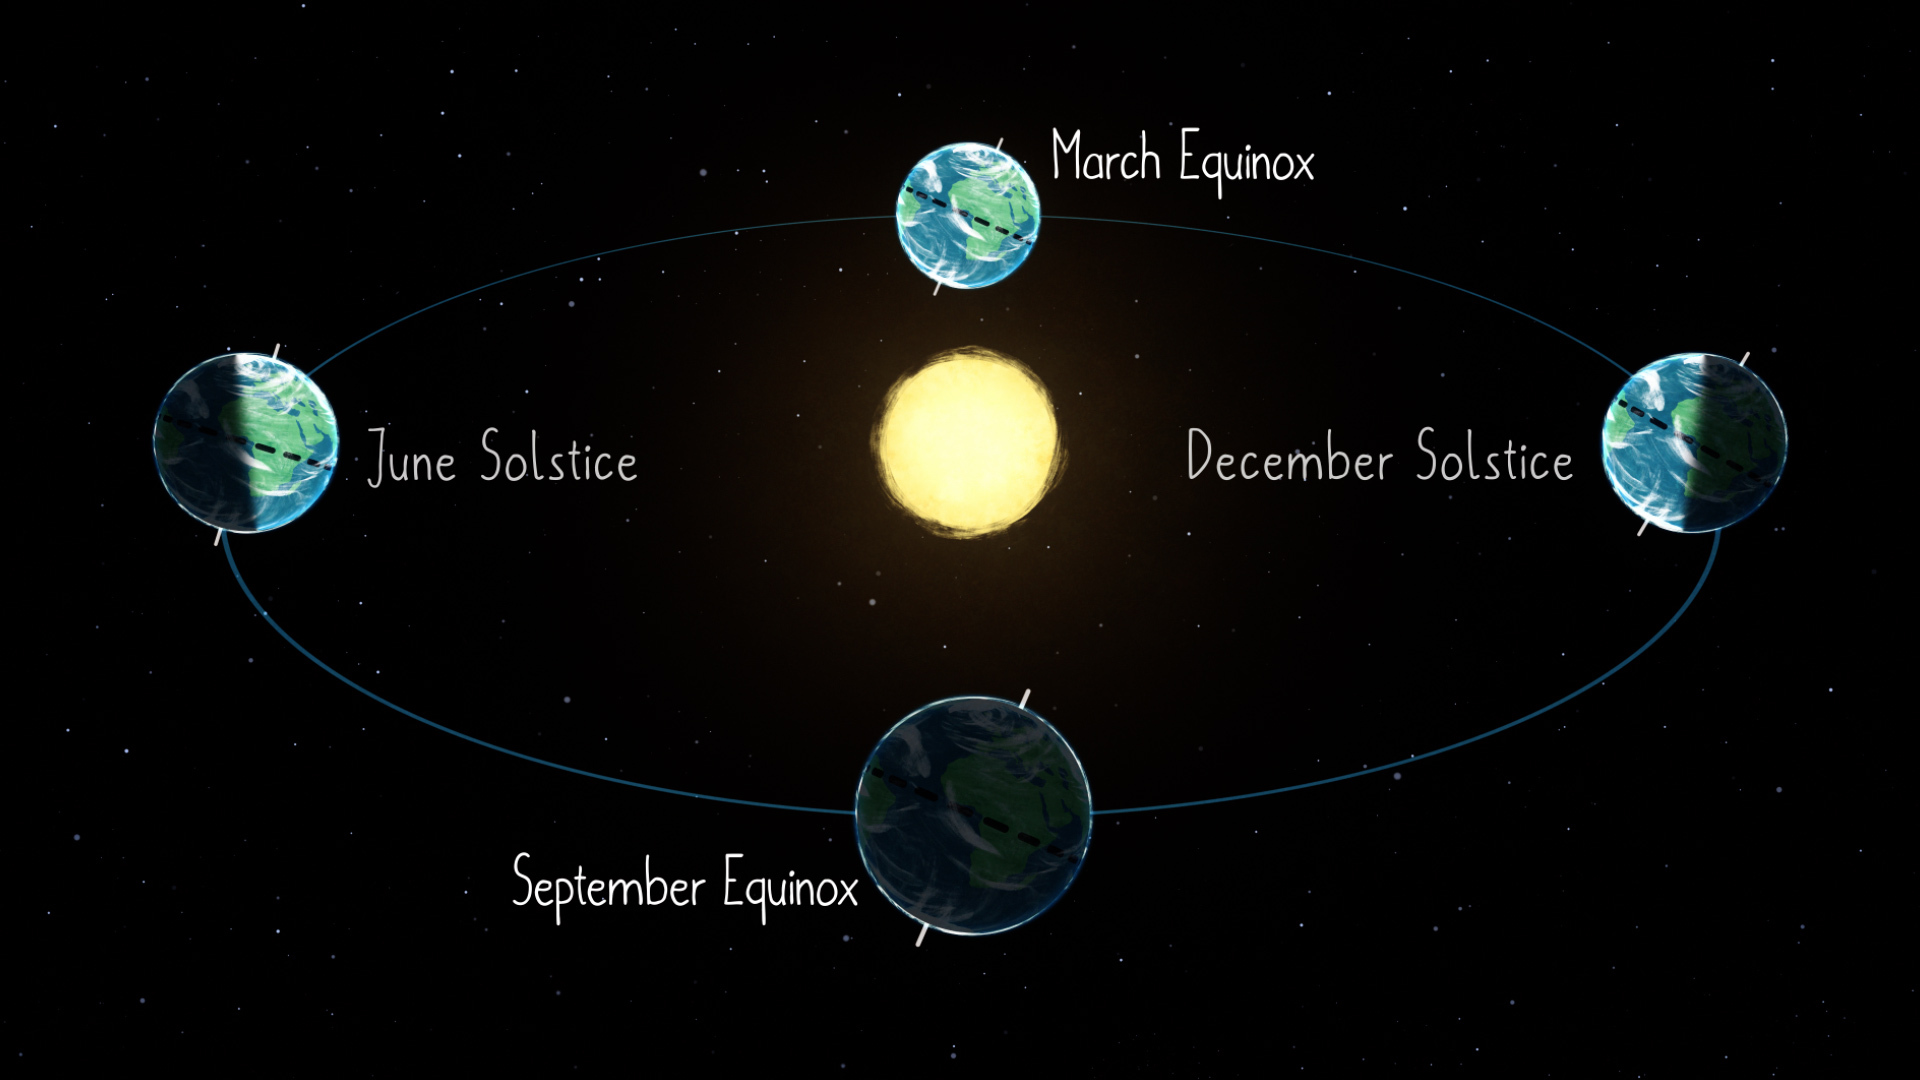 illustration of equinoxes and solstices on Earth in relation to the Sun